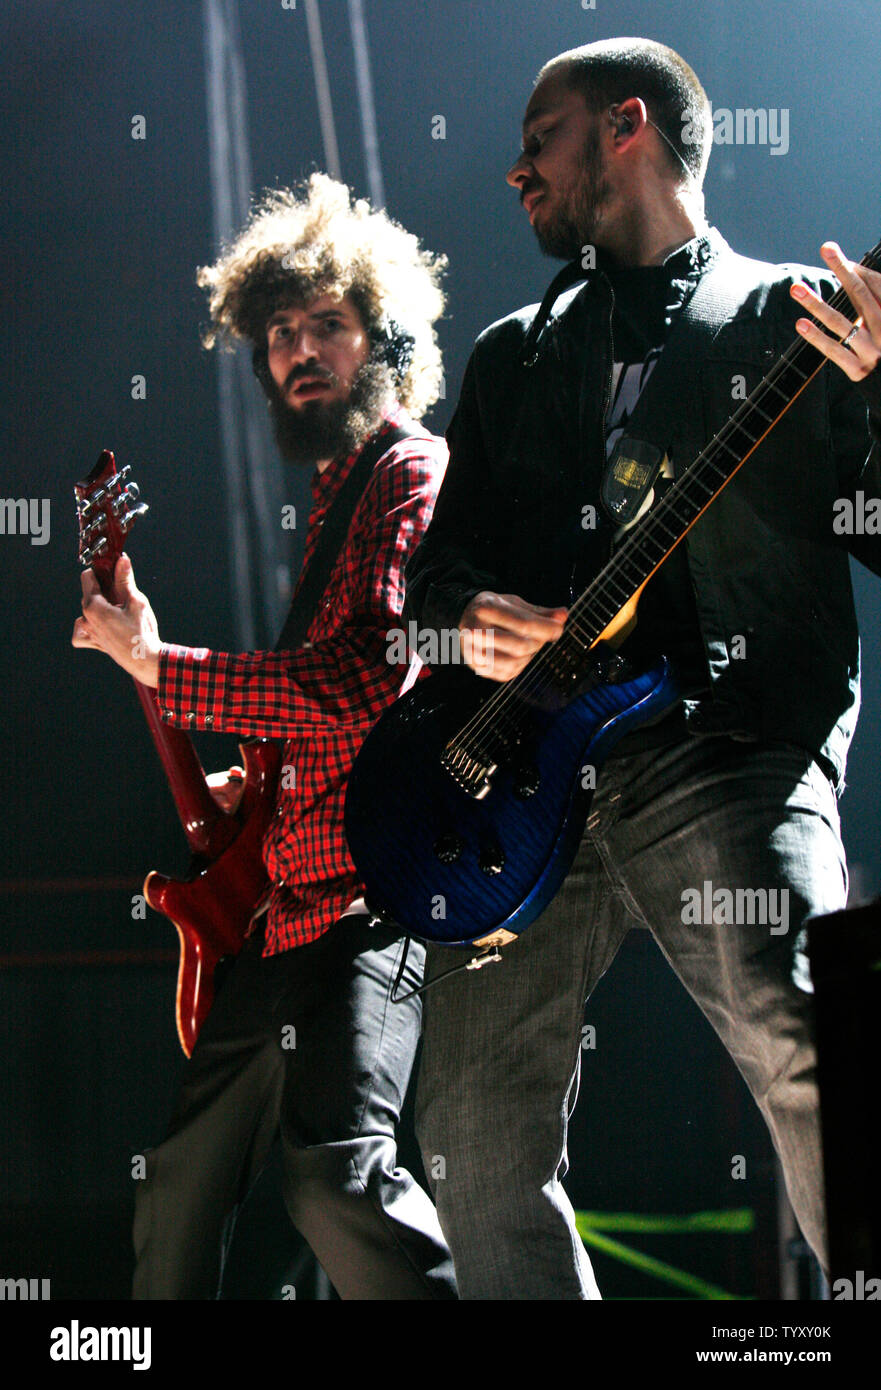 Guitarists Mike Shinoda (R) and Brad Delson of the band Linkin Park perform in concert at Bercy in Paris on May 30, 2007.   (UPI Photo/David Silpa) Stock Photo